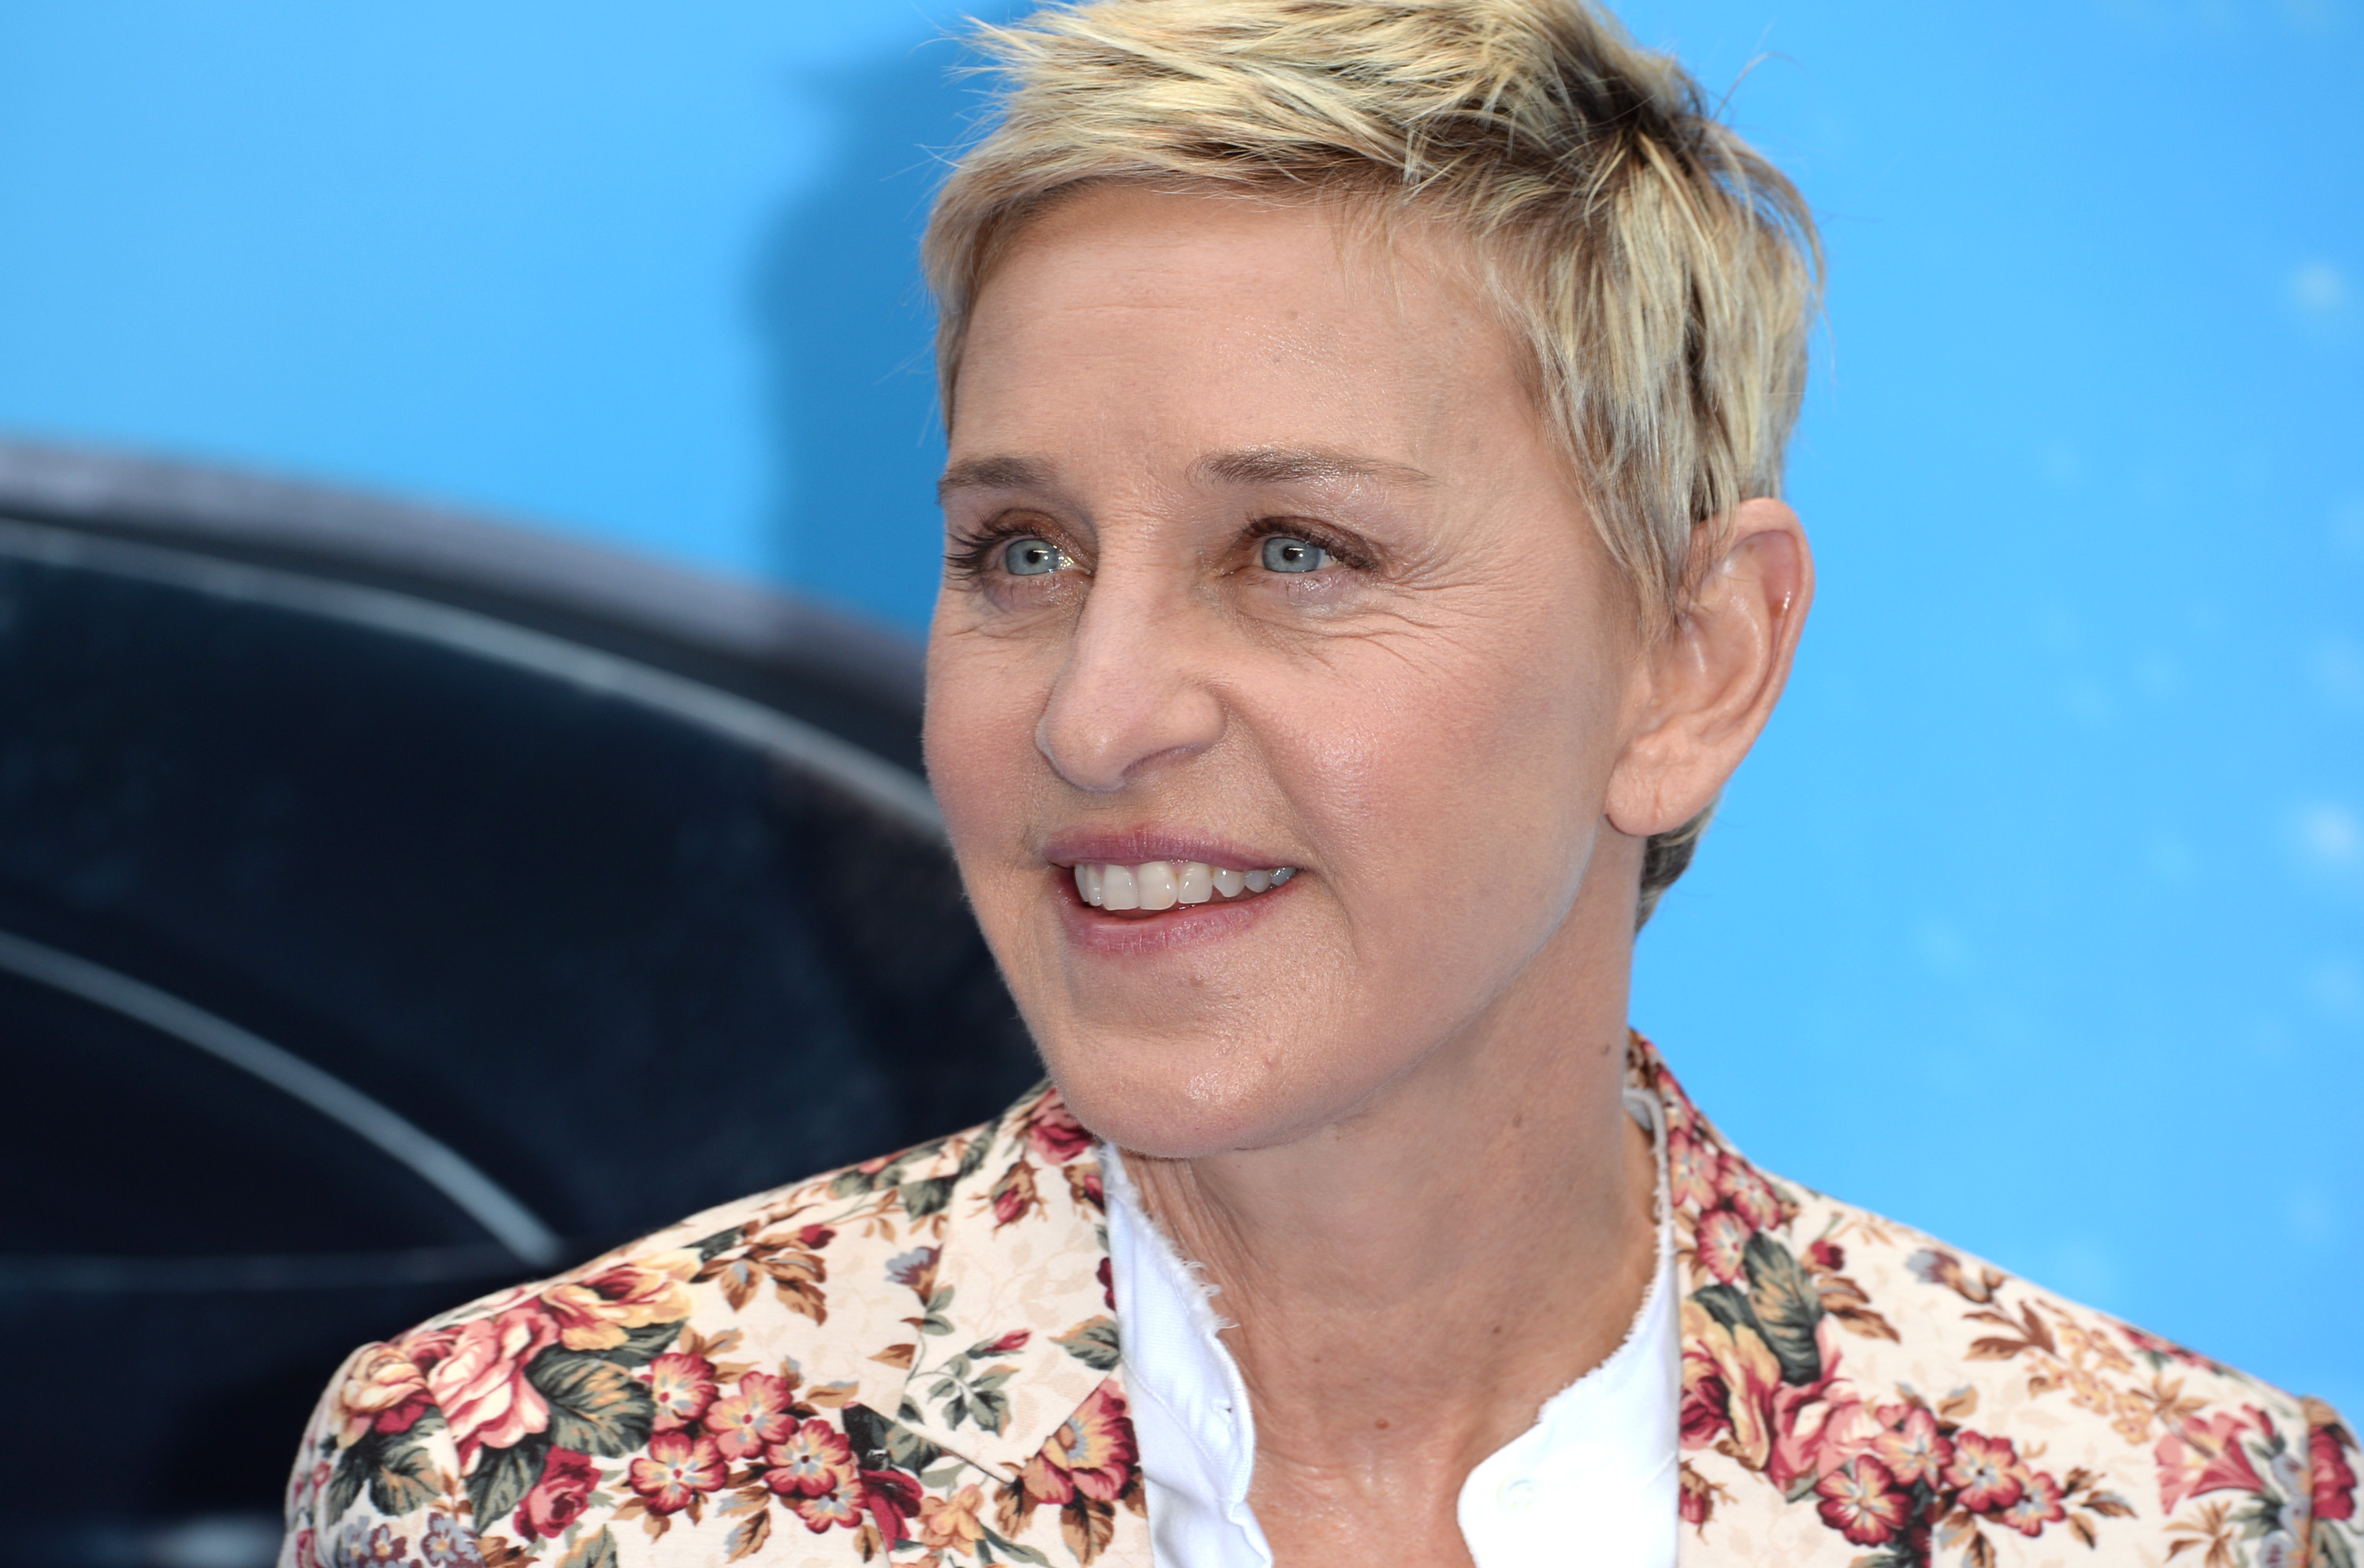 Ellen DeGeneres attends the UK Premiere of "Finding Dory" at Odeon Leicester Square in London on July 10, 2016. (Anthony Harvey—Getty Images)